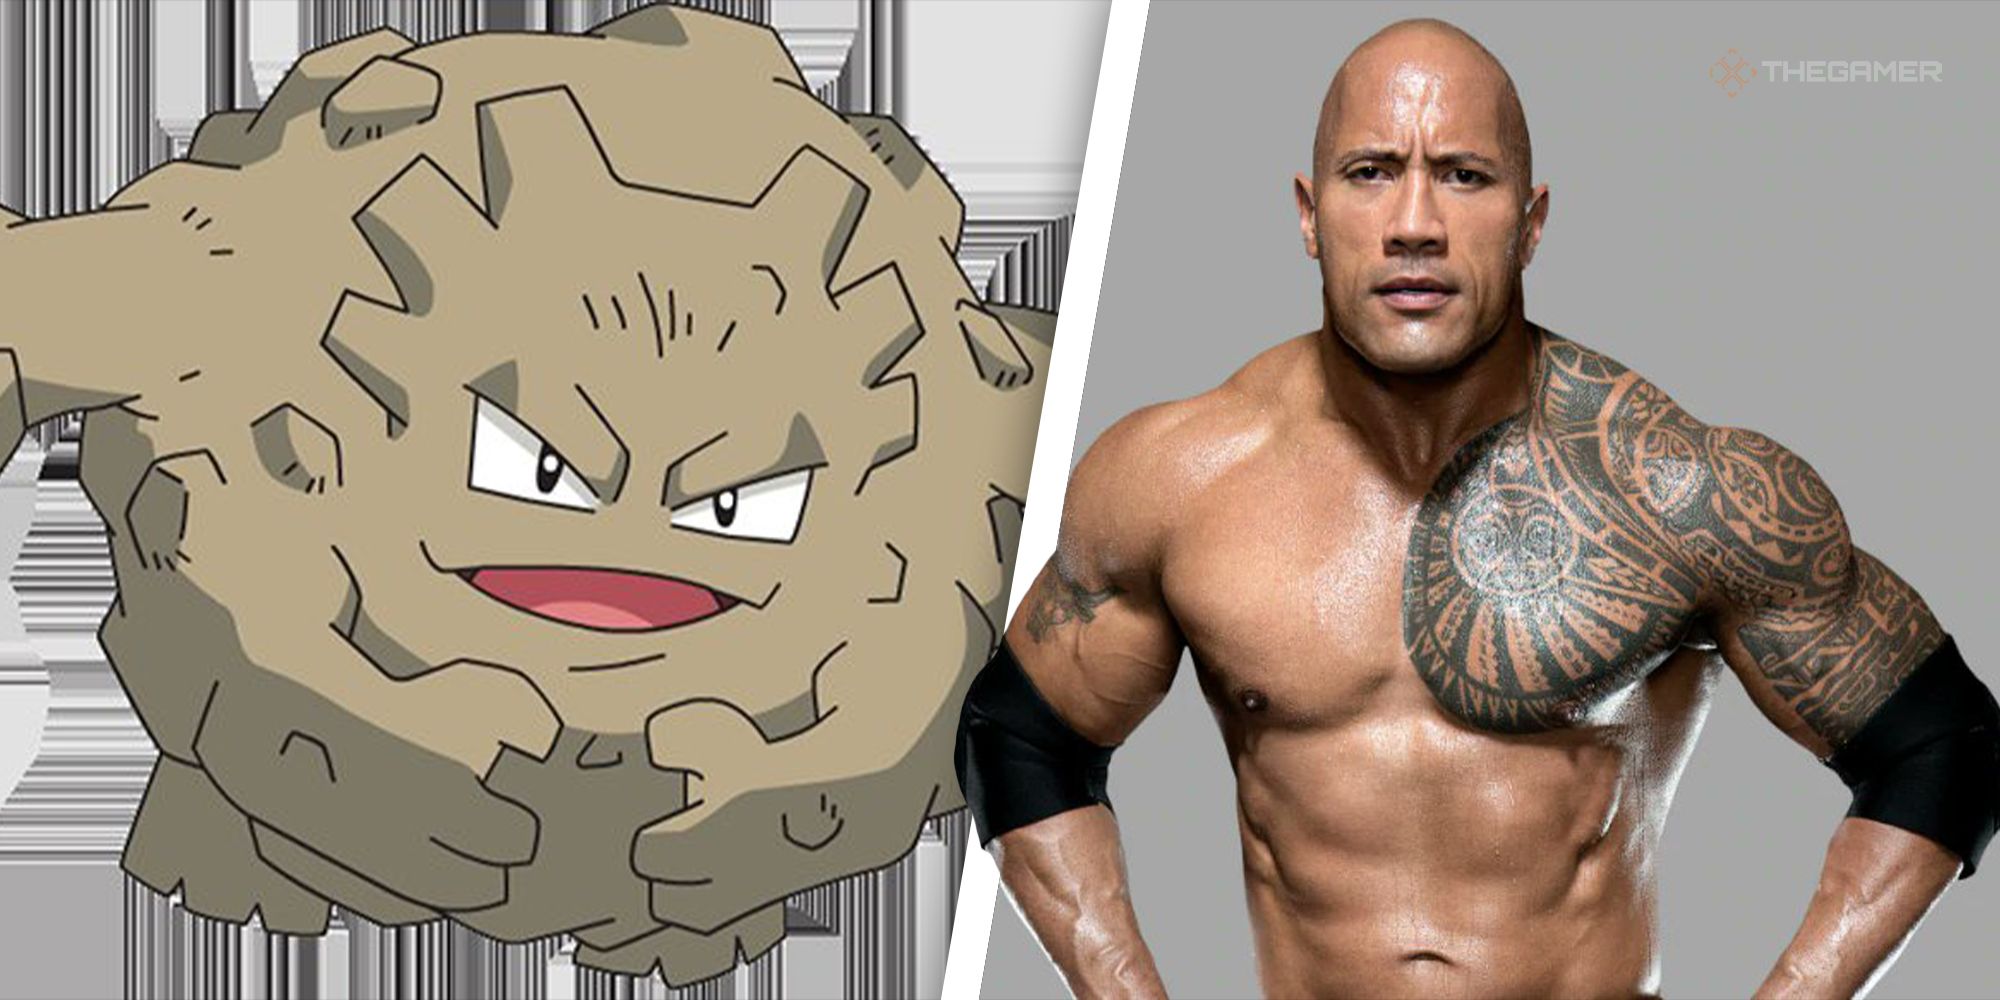 Heres 30 Wrestlers As Pokemon For The Royal Rumble (30)